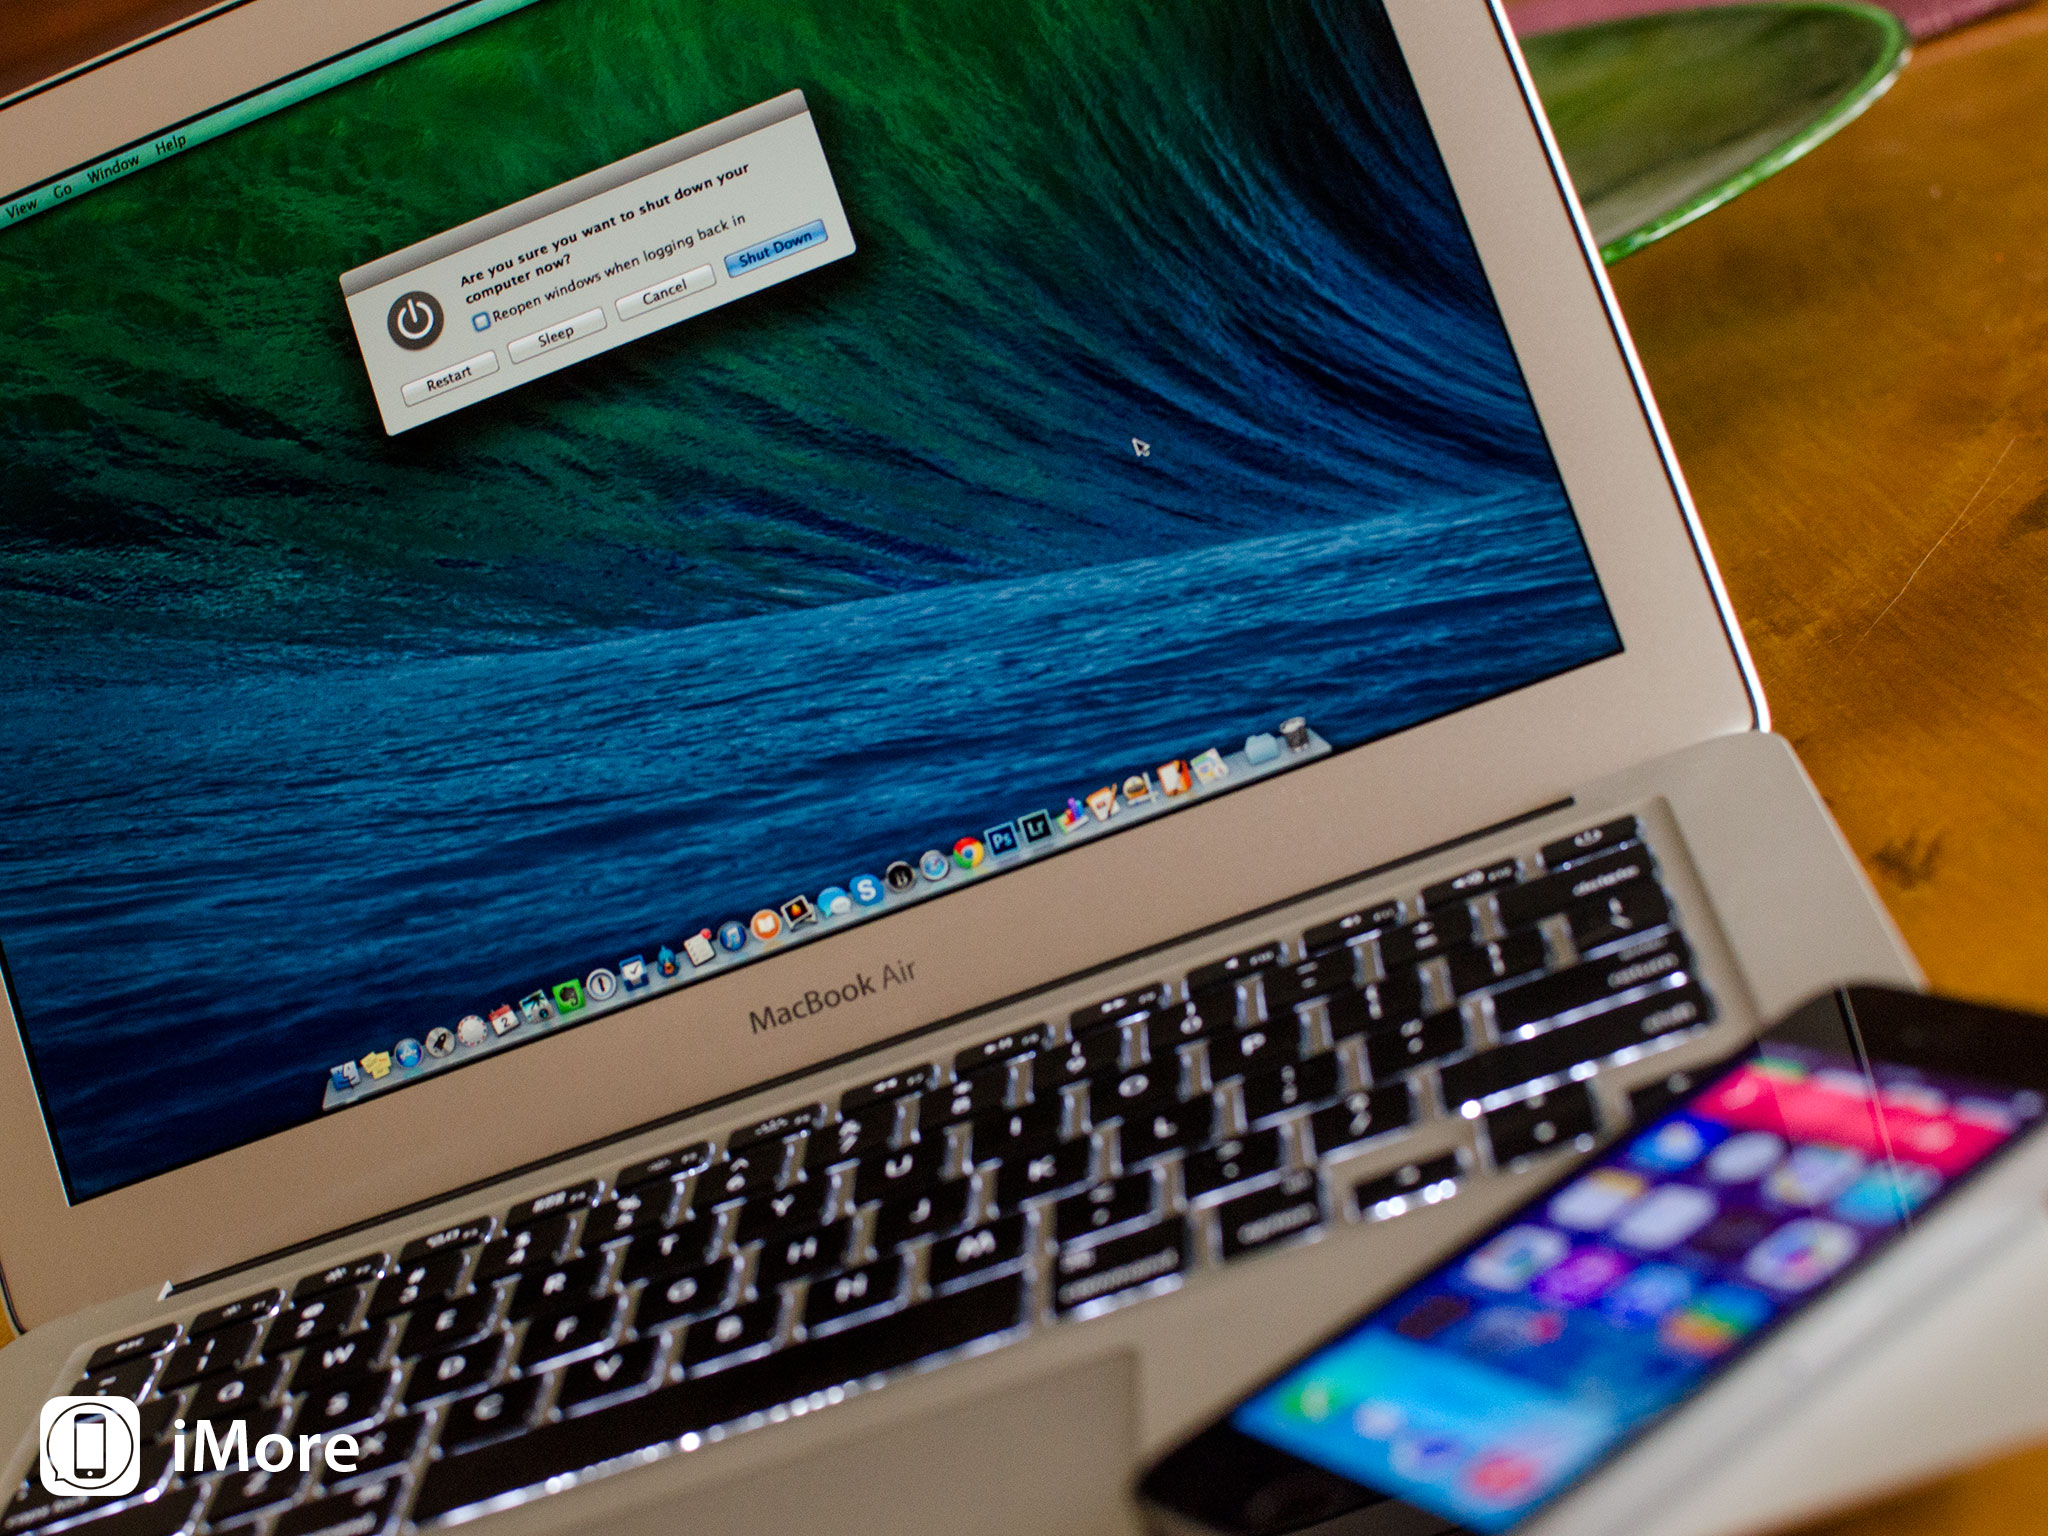 How to use the power button in OS X Mavericks: It&#39;s just like your iPhone and iPad now